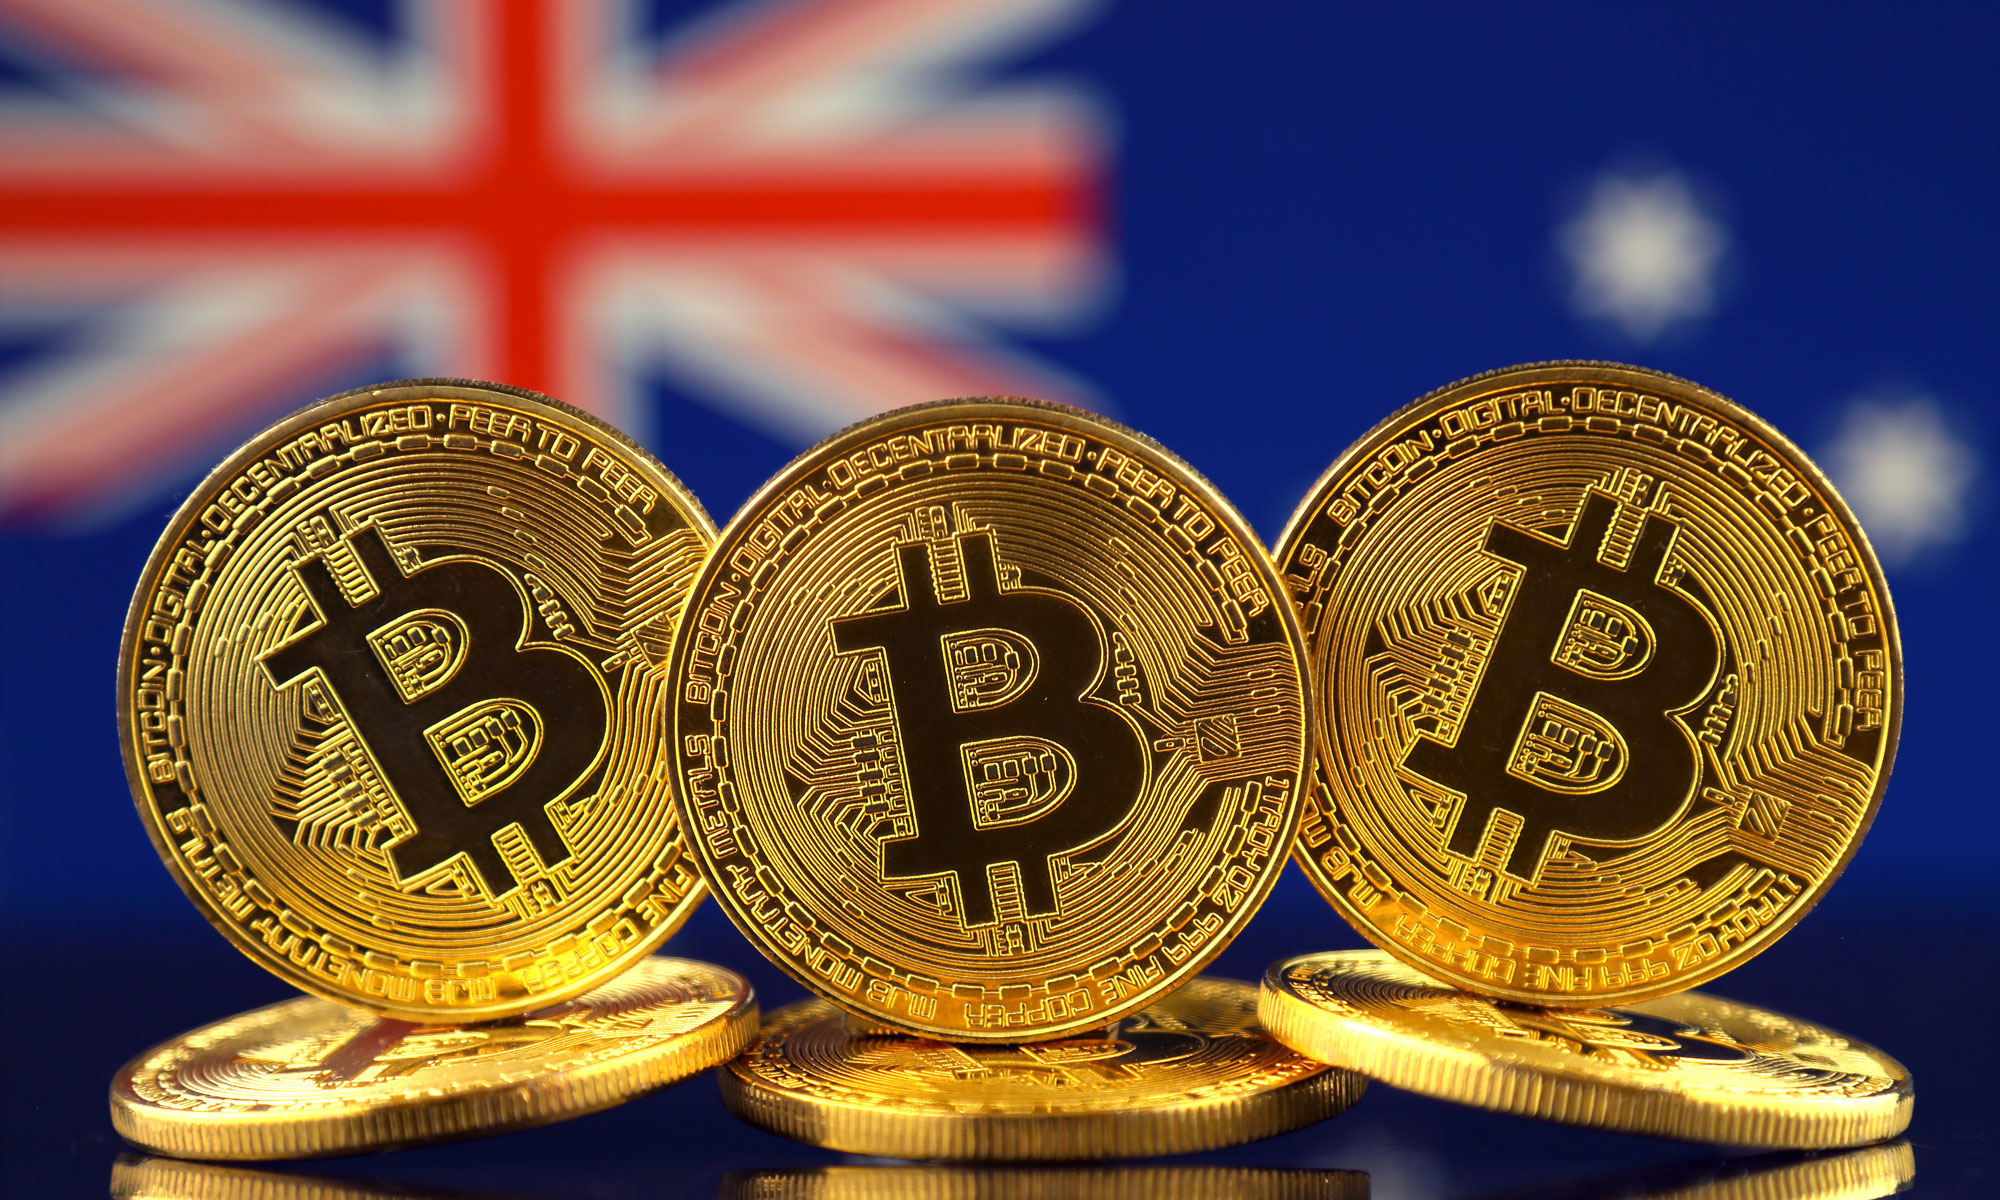 Convert 1 BTC to AUD - Bitcoin price in AUD | CoinCodex